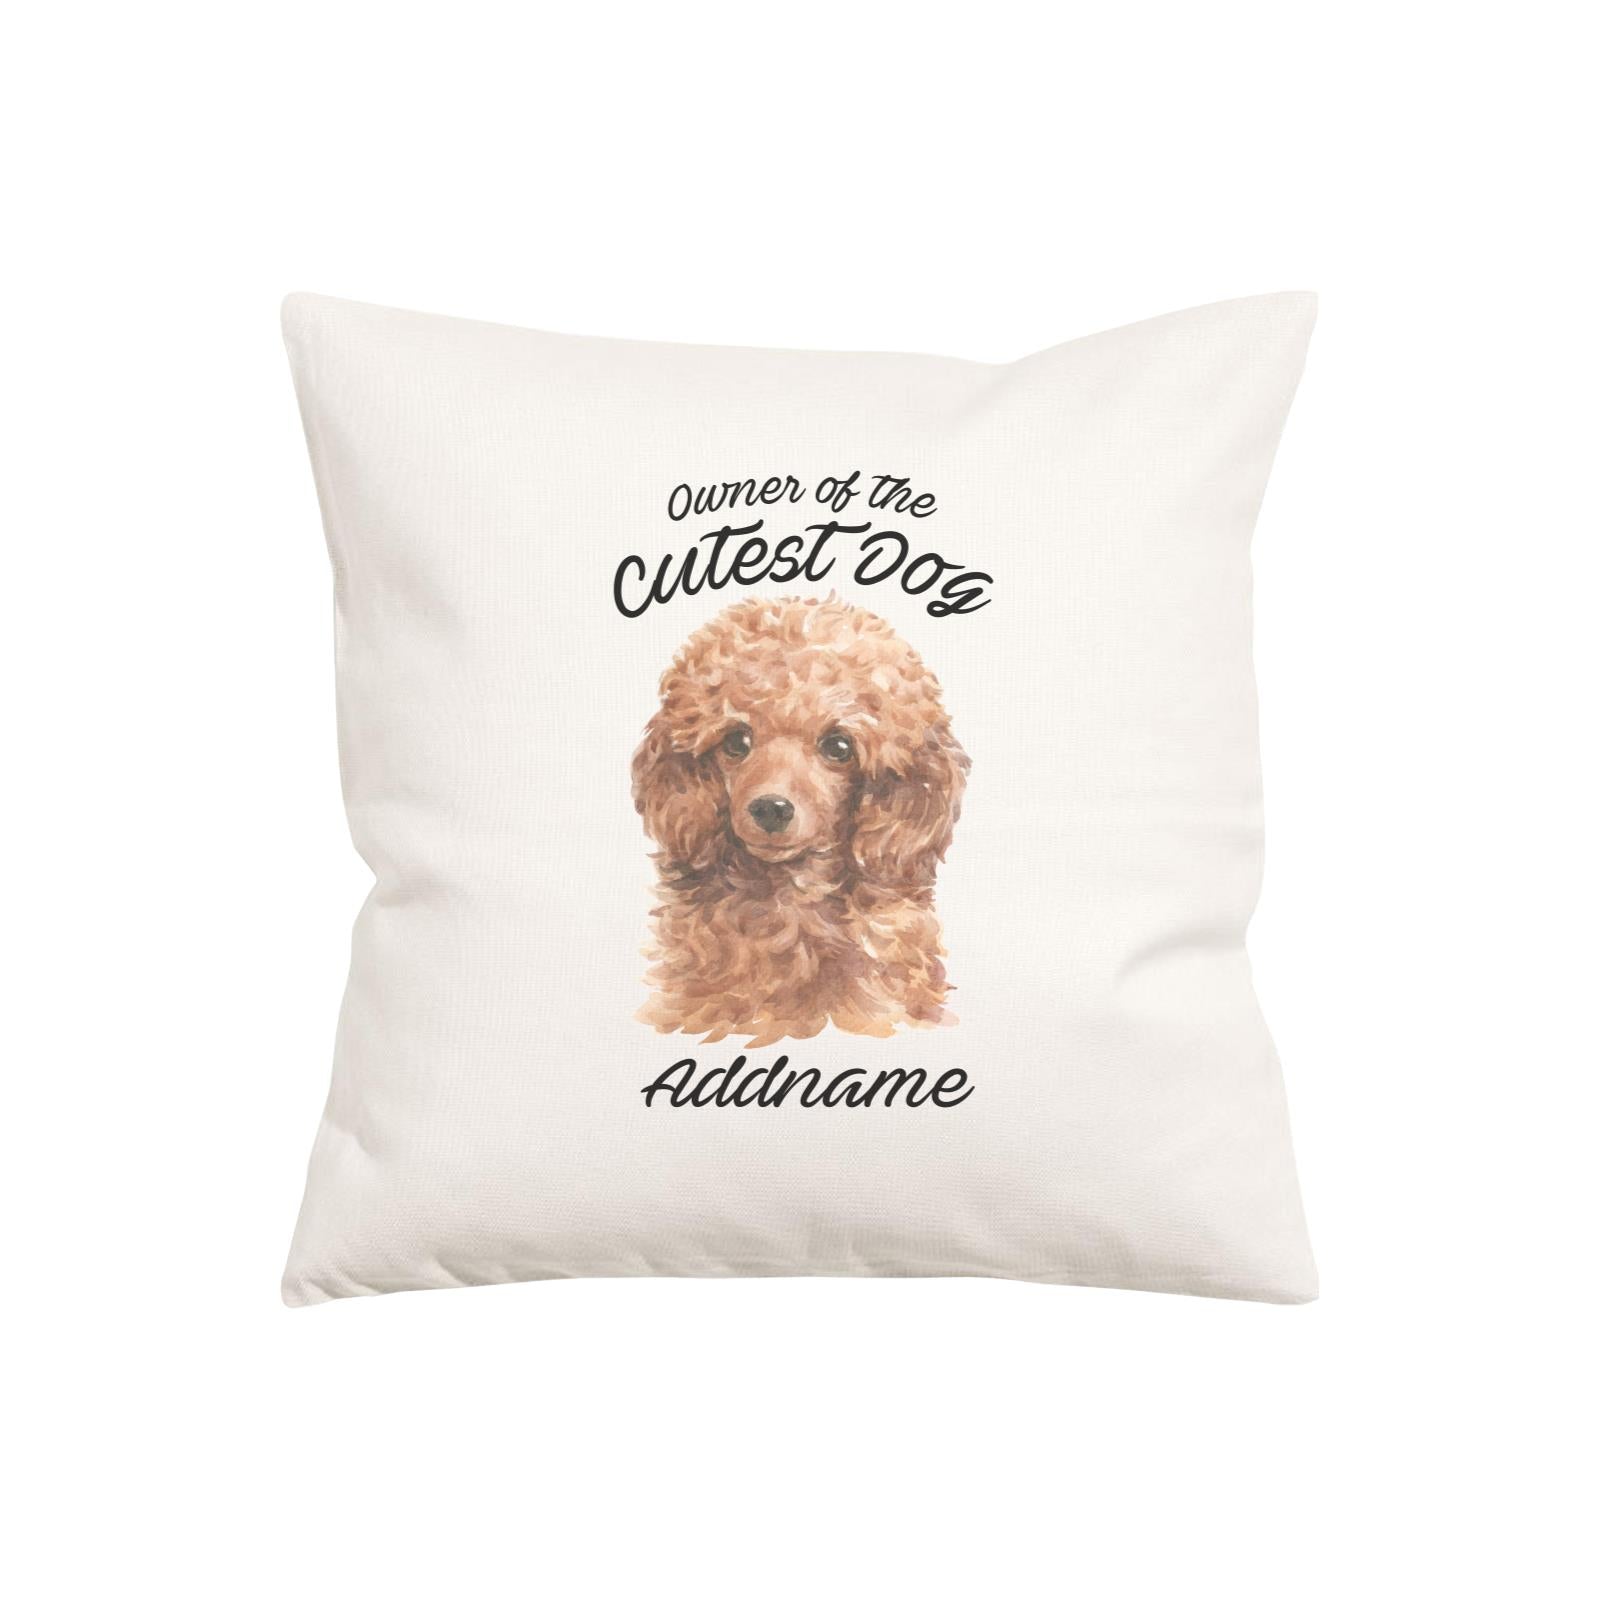 Watercolor Dog Owner Of The Cutest Dog Poodle Brown Addname Pillow Cushion